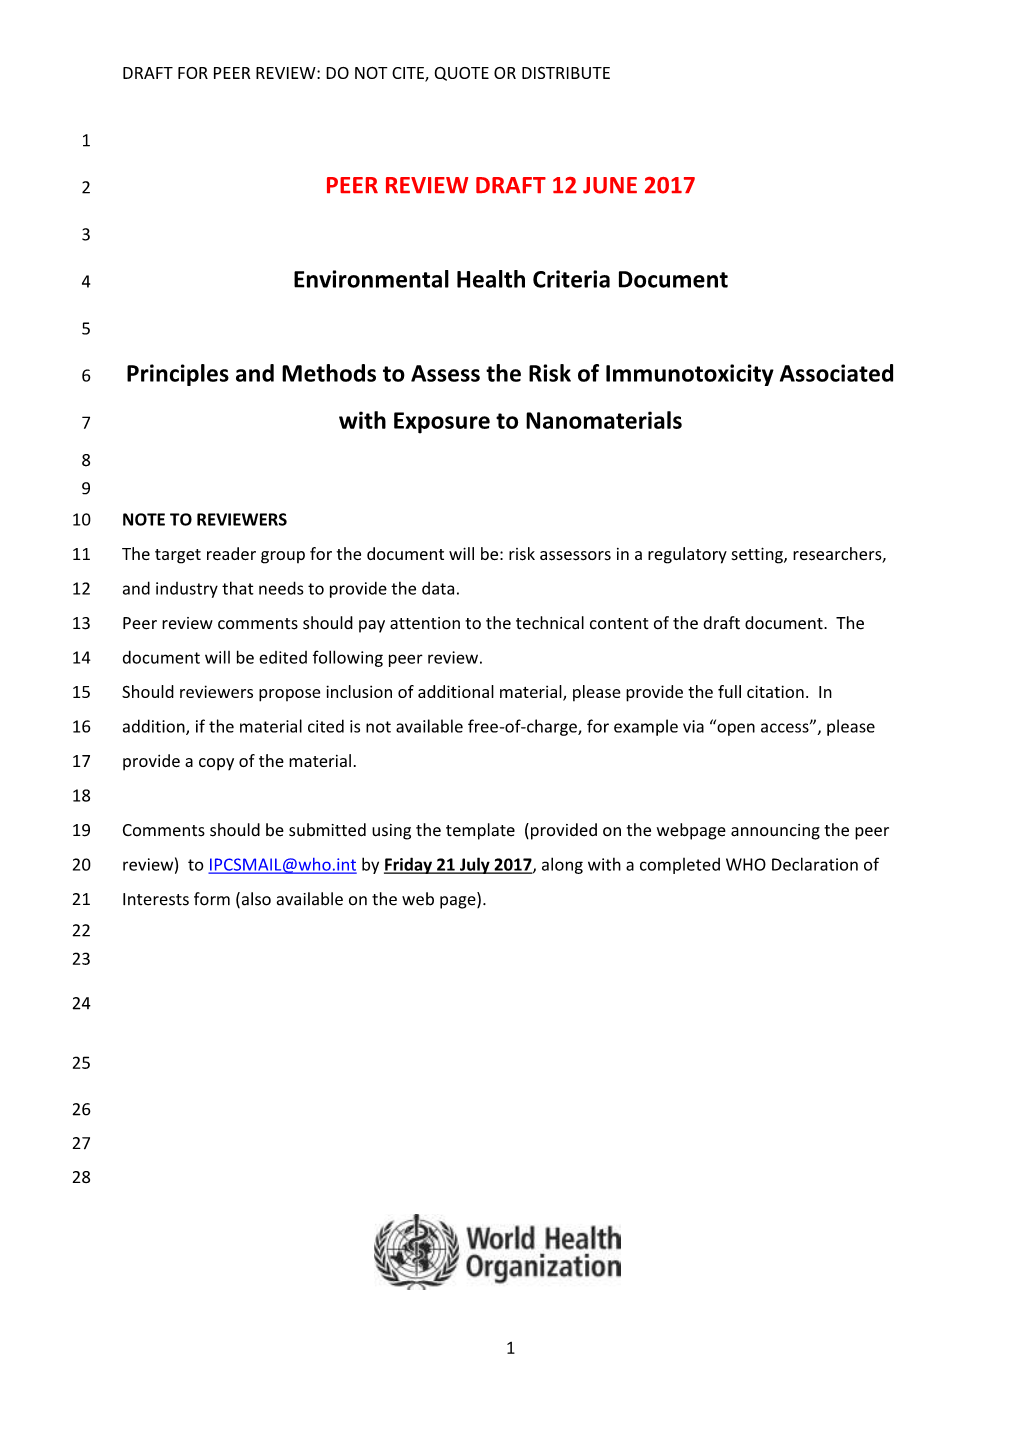 PEER REVIEW DRAFT 12 JUNE 2017 Environmental Health Criteria Document Principles and Methods to Assess the Risk of Immunotoxicit